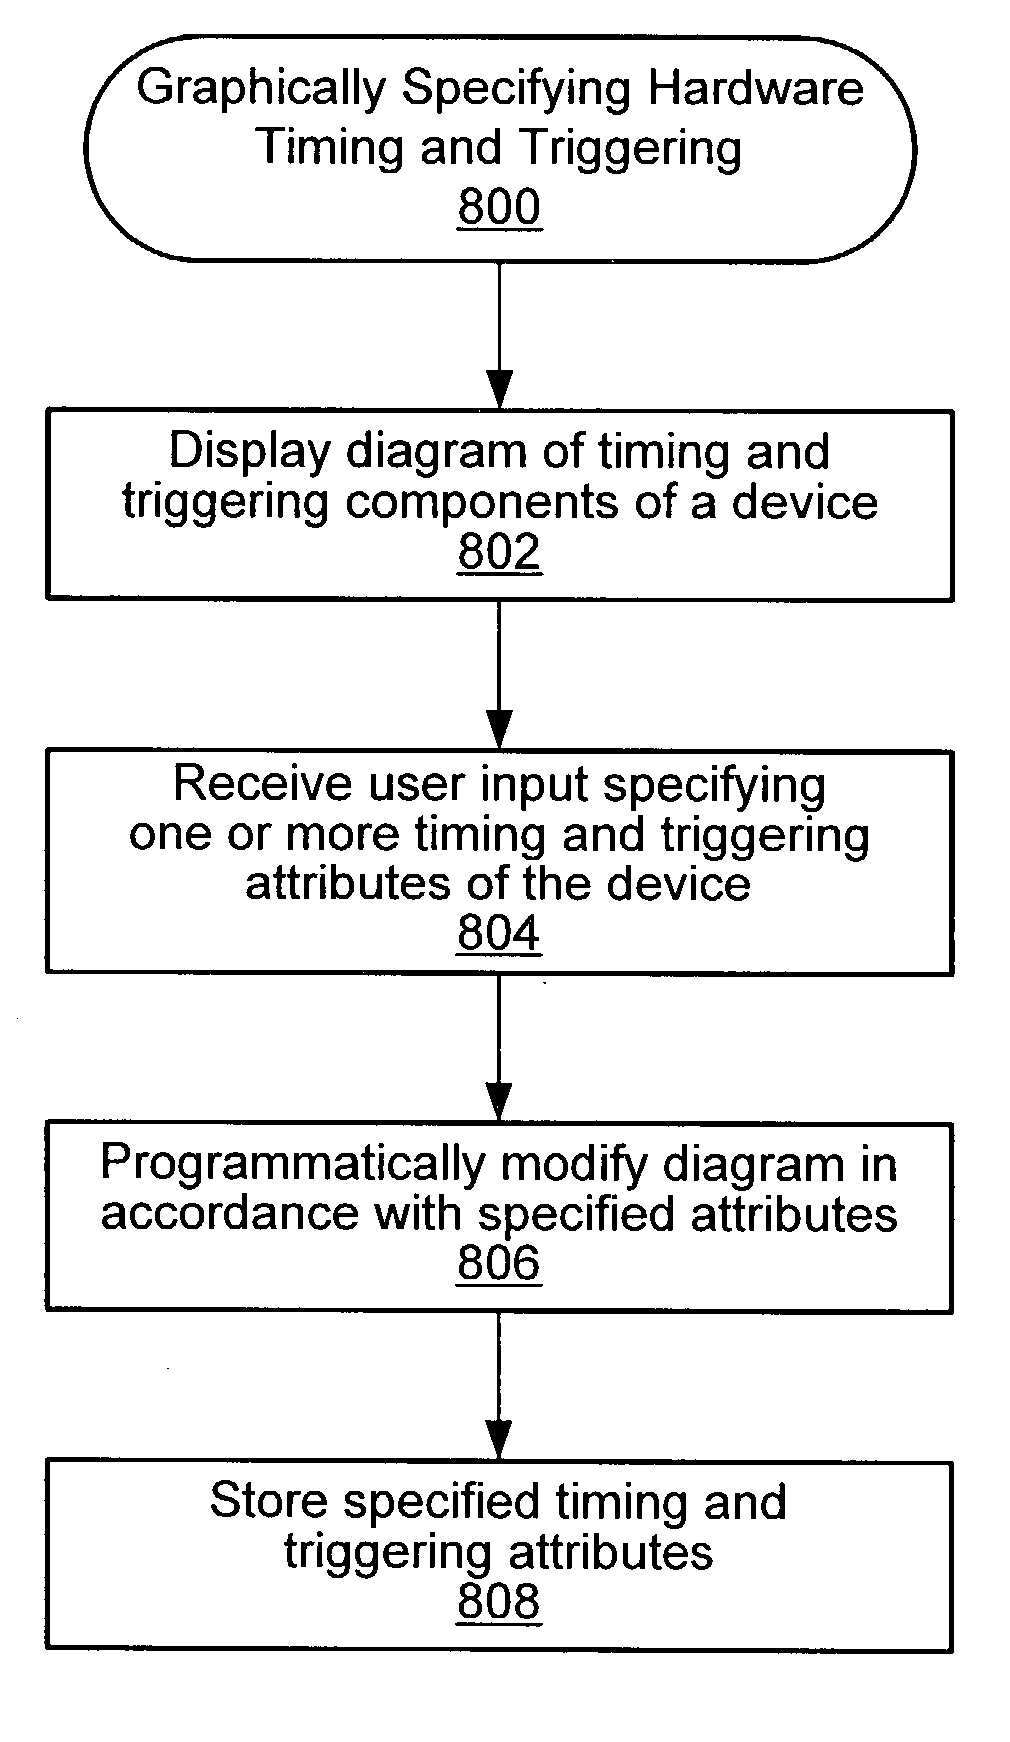 Parameter oriented graphical representation of hardware timing and triggering capabilities with contextual information